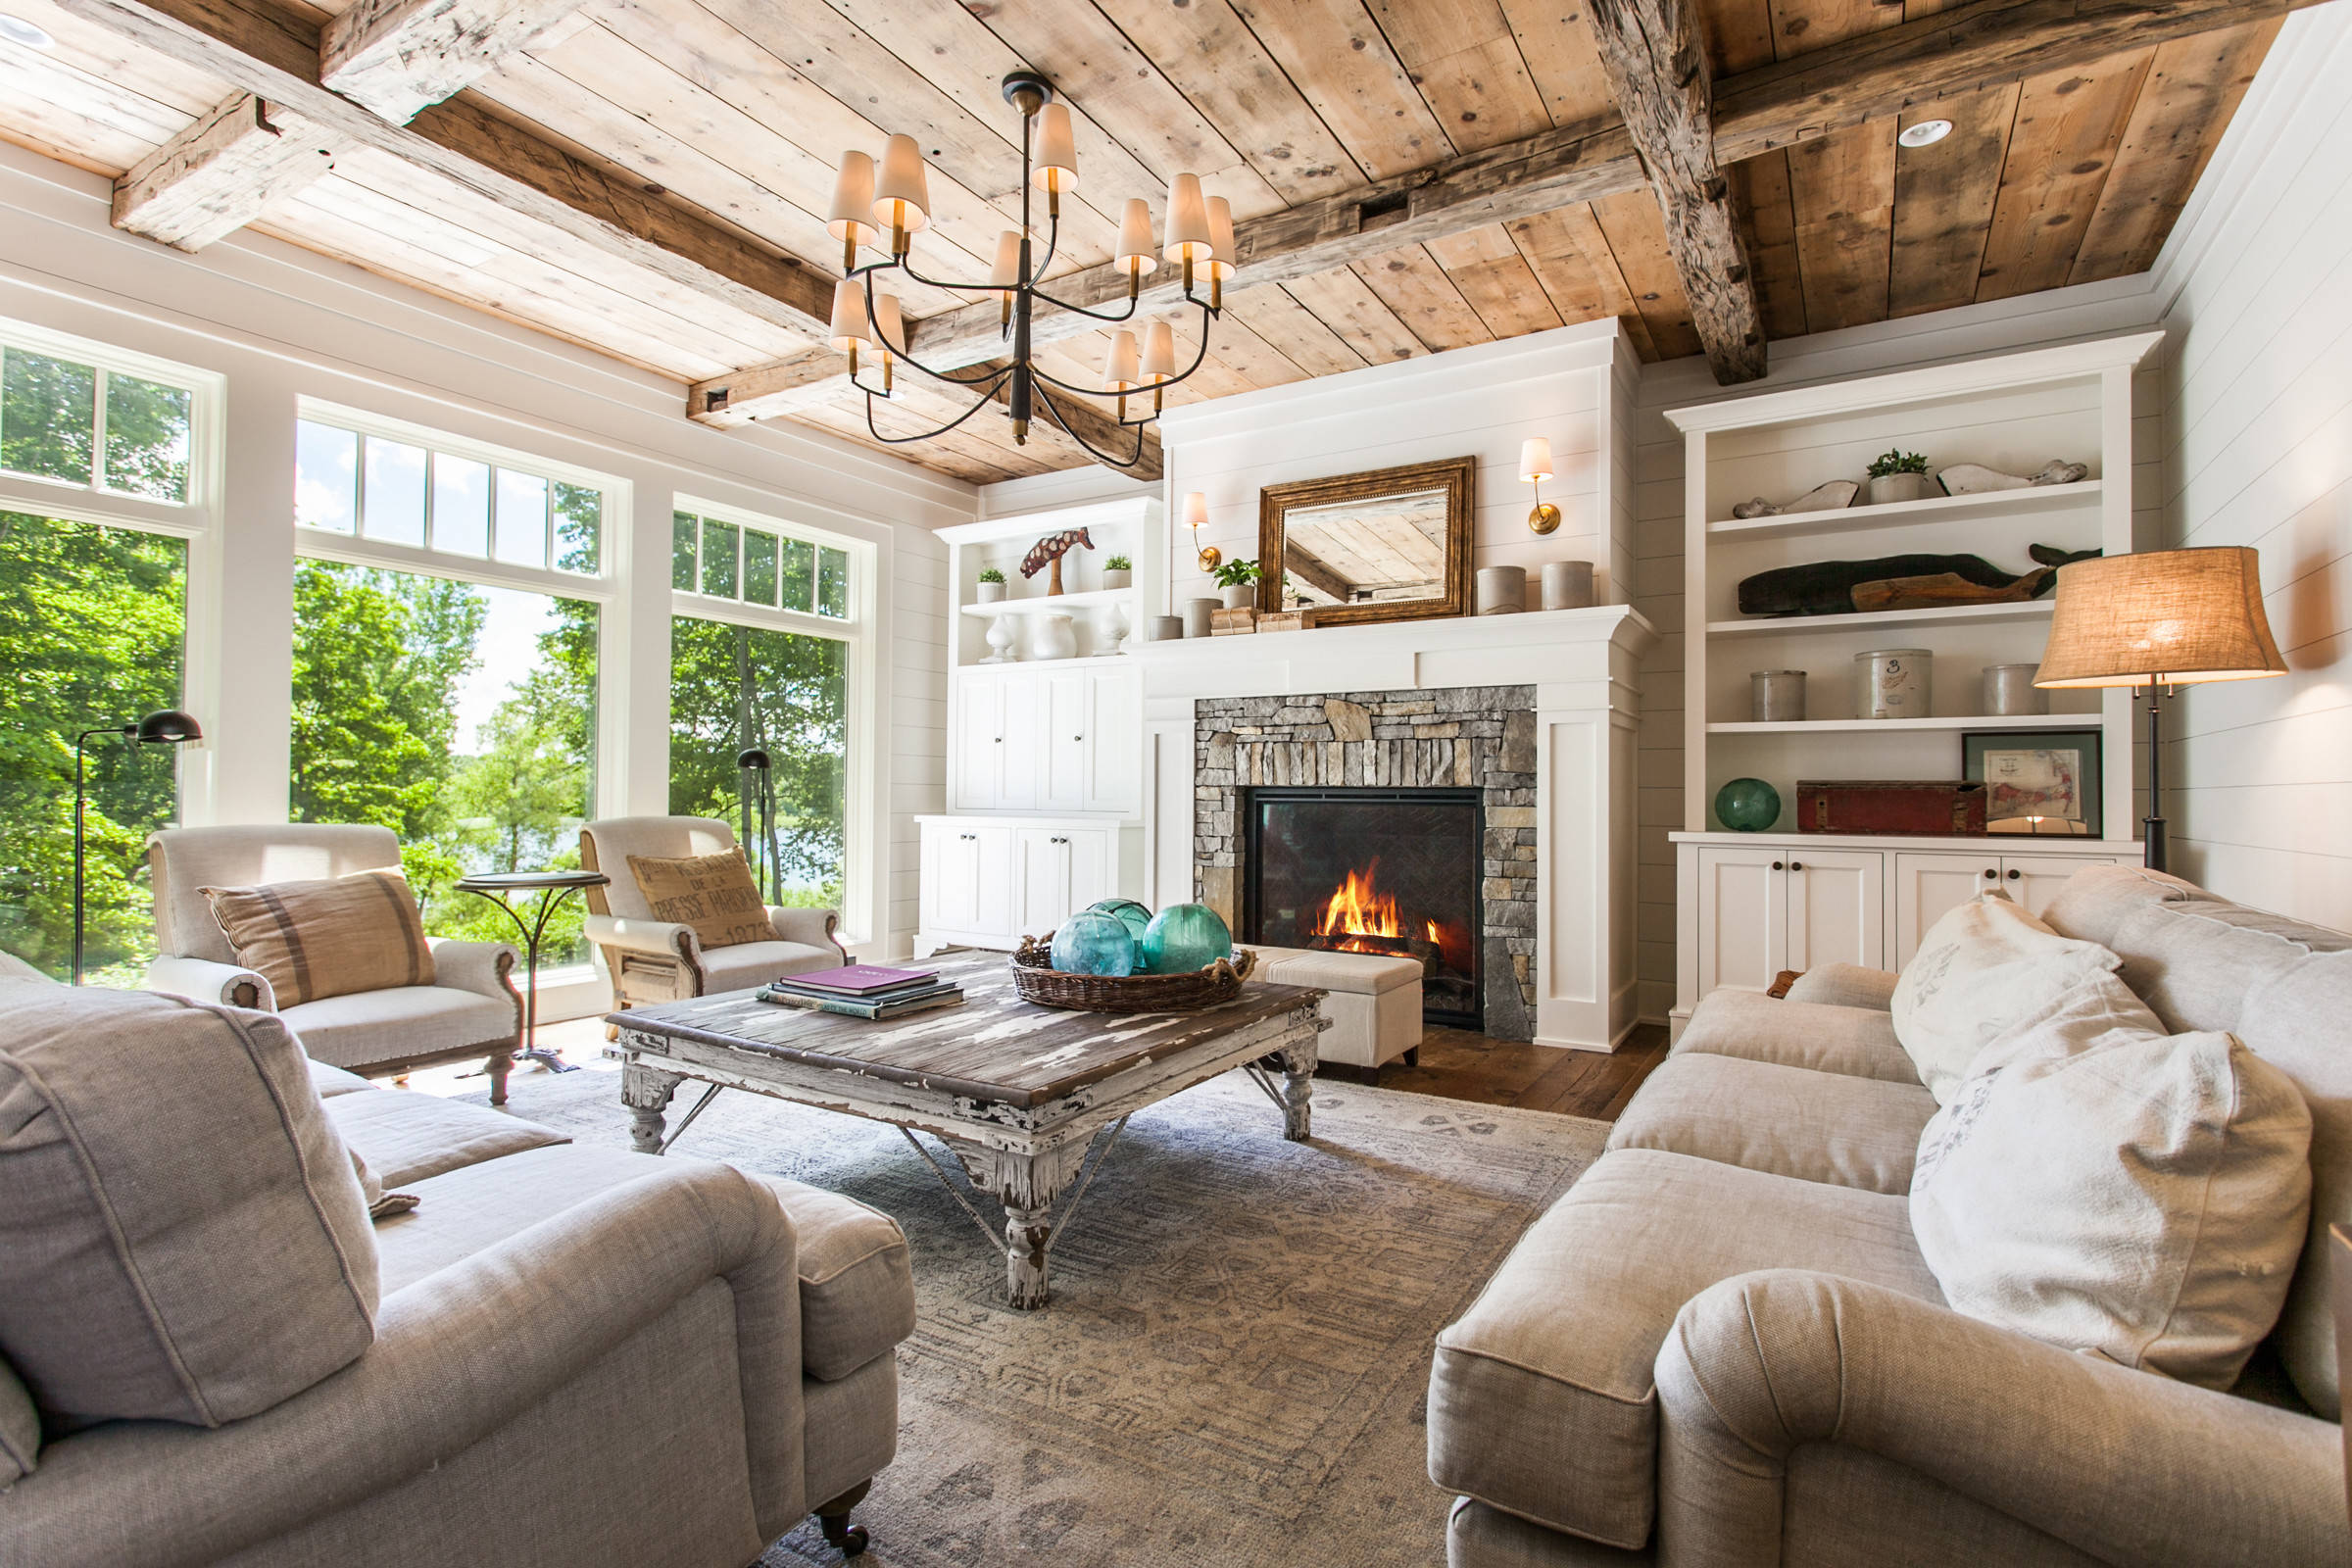 Beautiful Farmhouse Living Rooms: Cozy Rustic Charm In A Modern Space